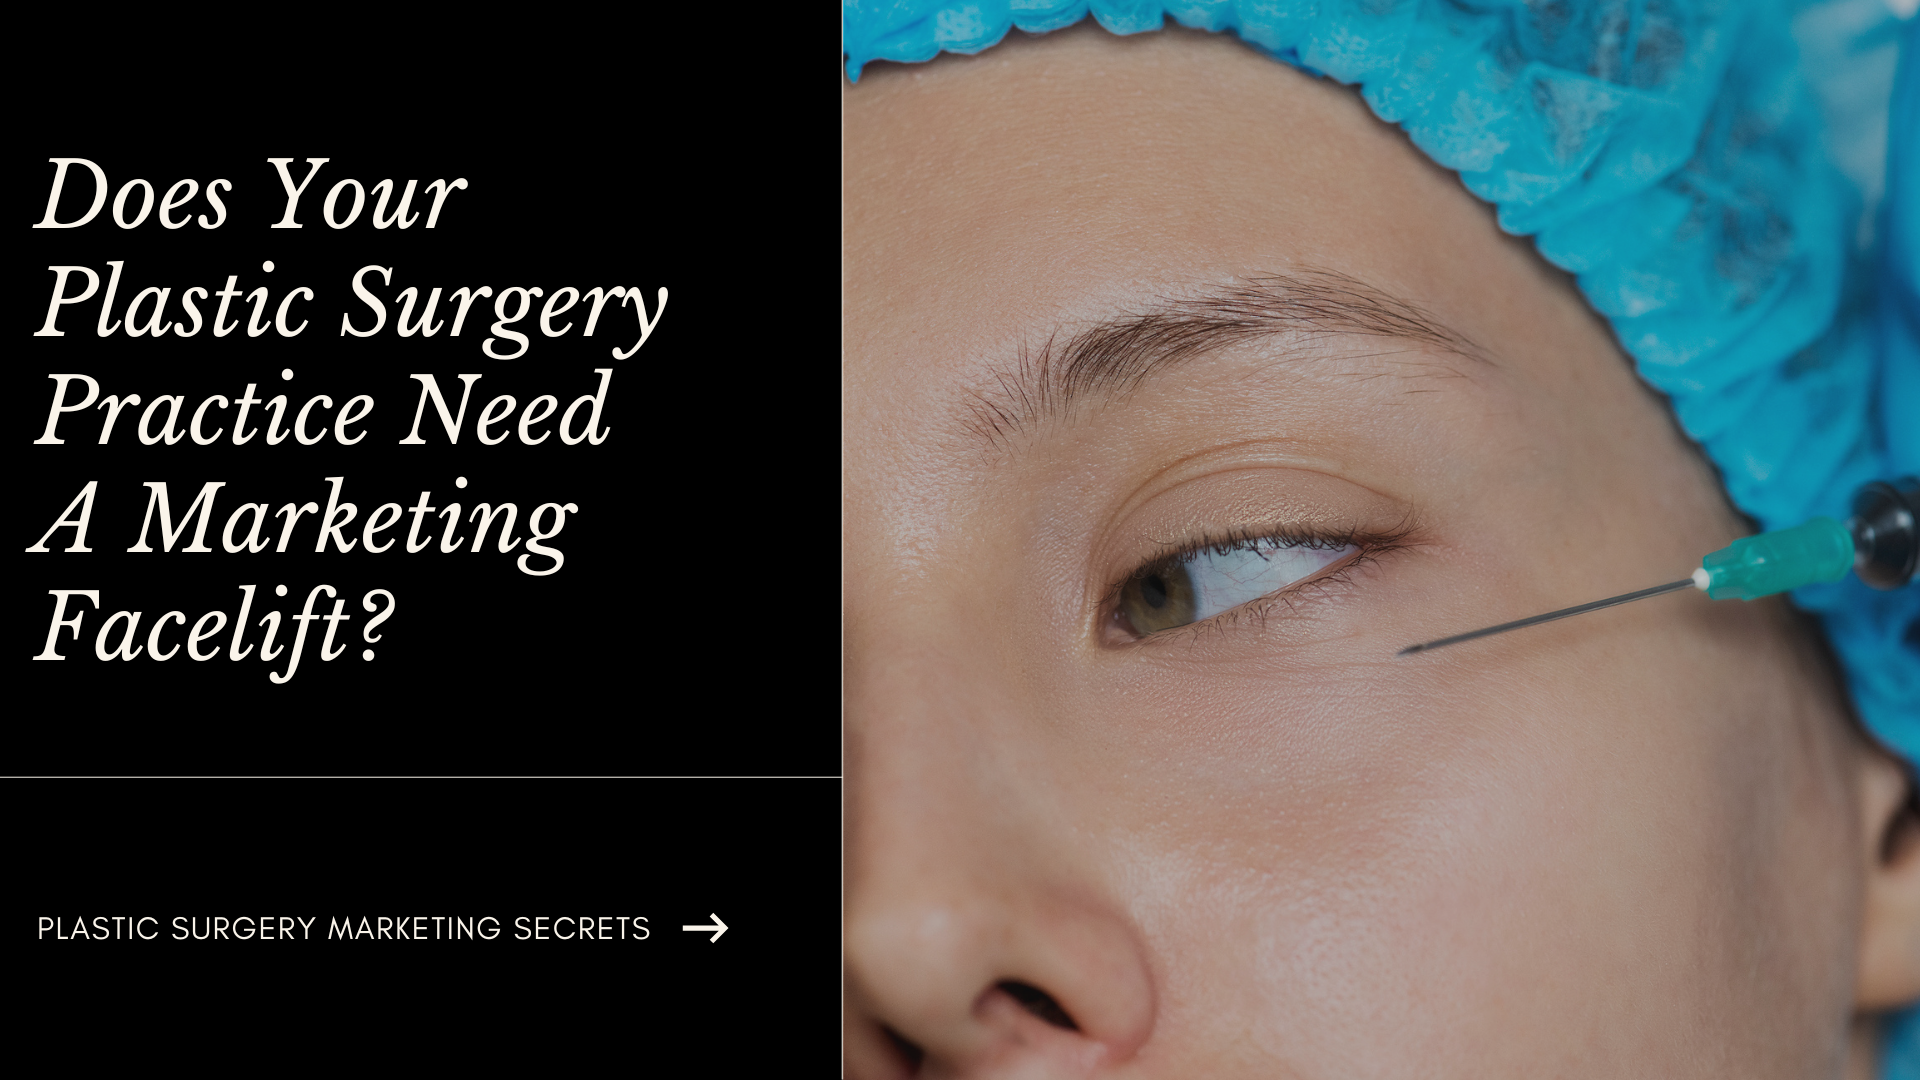 Plastic Surgery Marketing Does Your Plastic Surgery Practice Need A Marketing Facelift